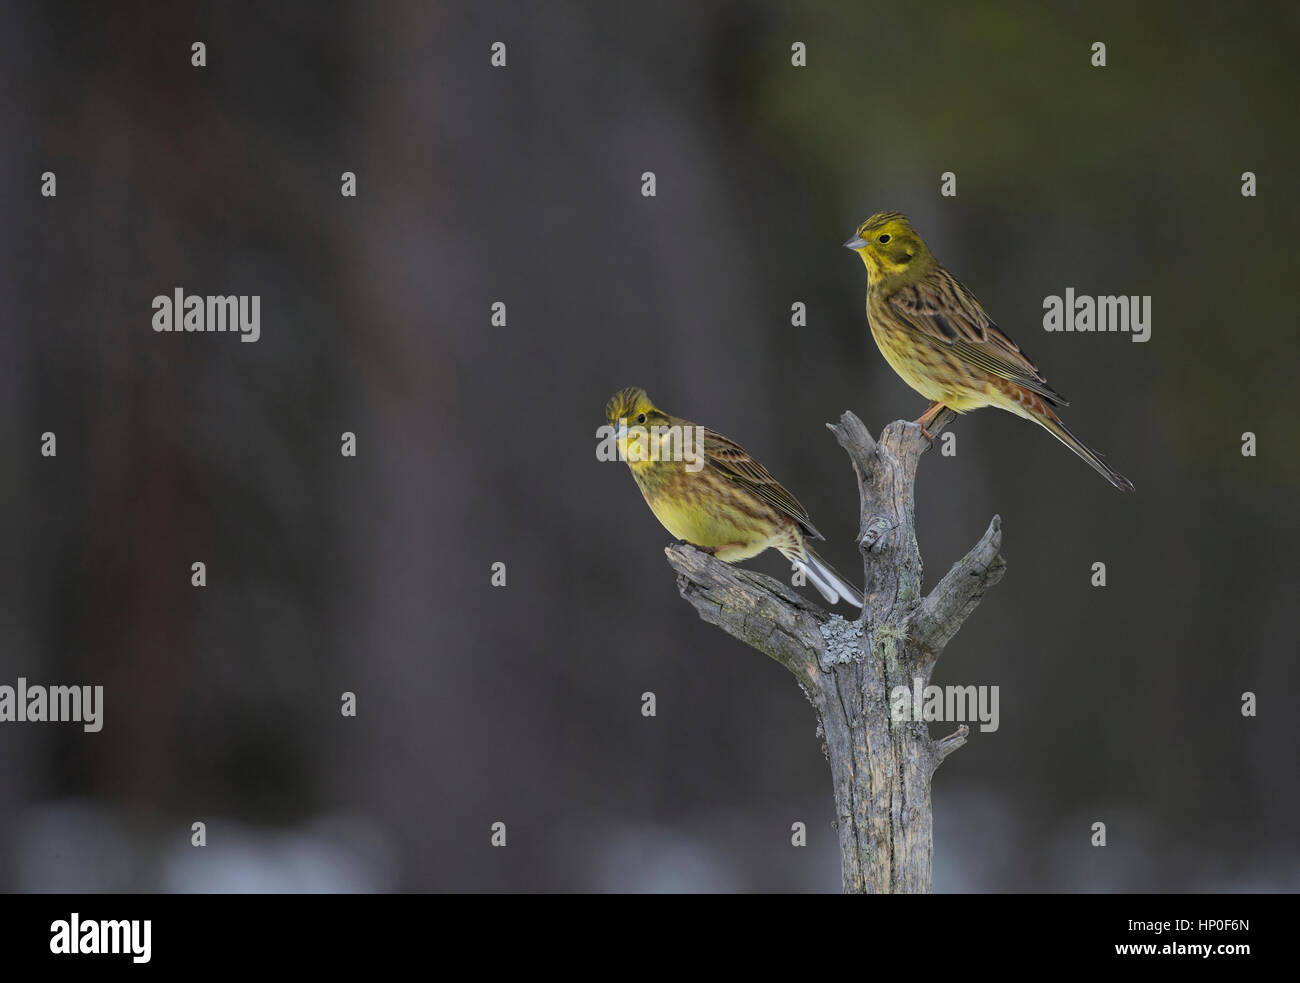 Two yellow hammers (Emberiza citrinella) perched at the top of a dead tree against a dark background Stock Photo